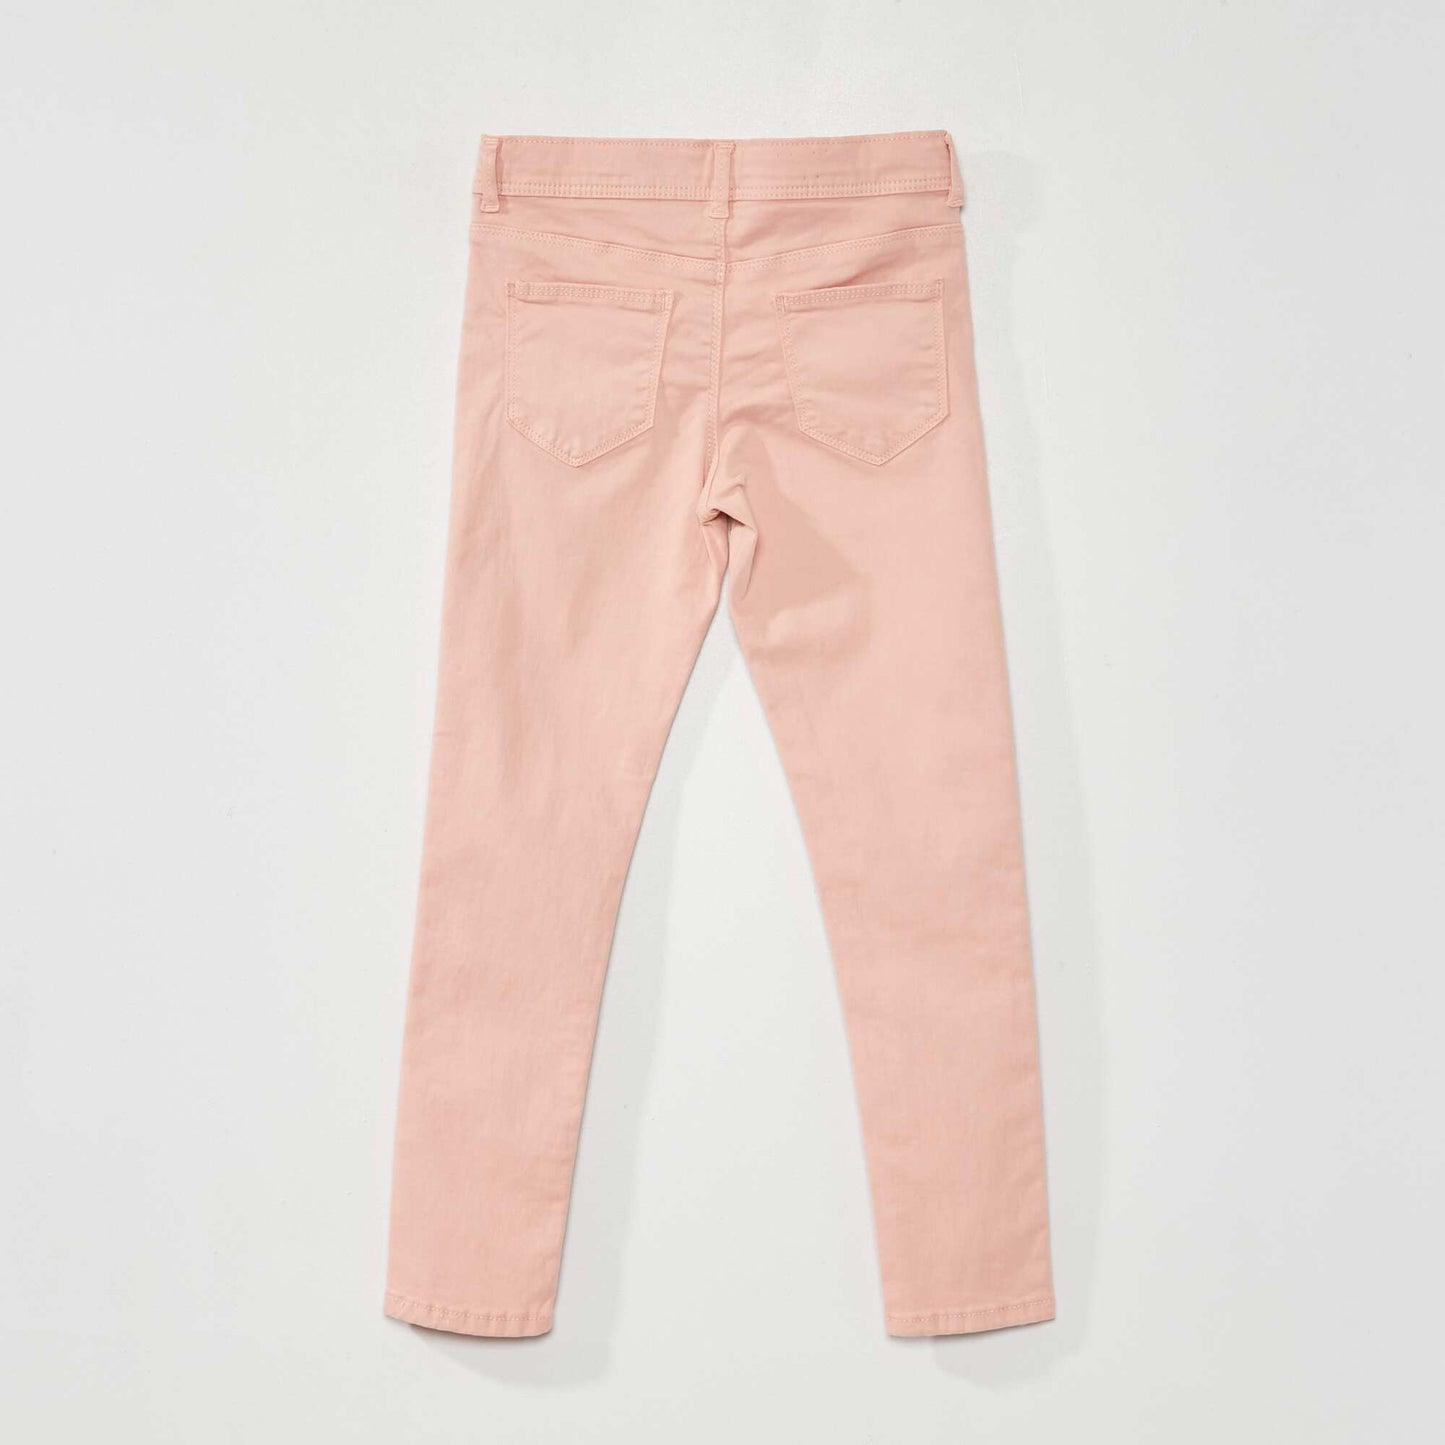 Skinny trousers pink